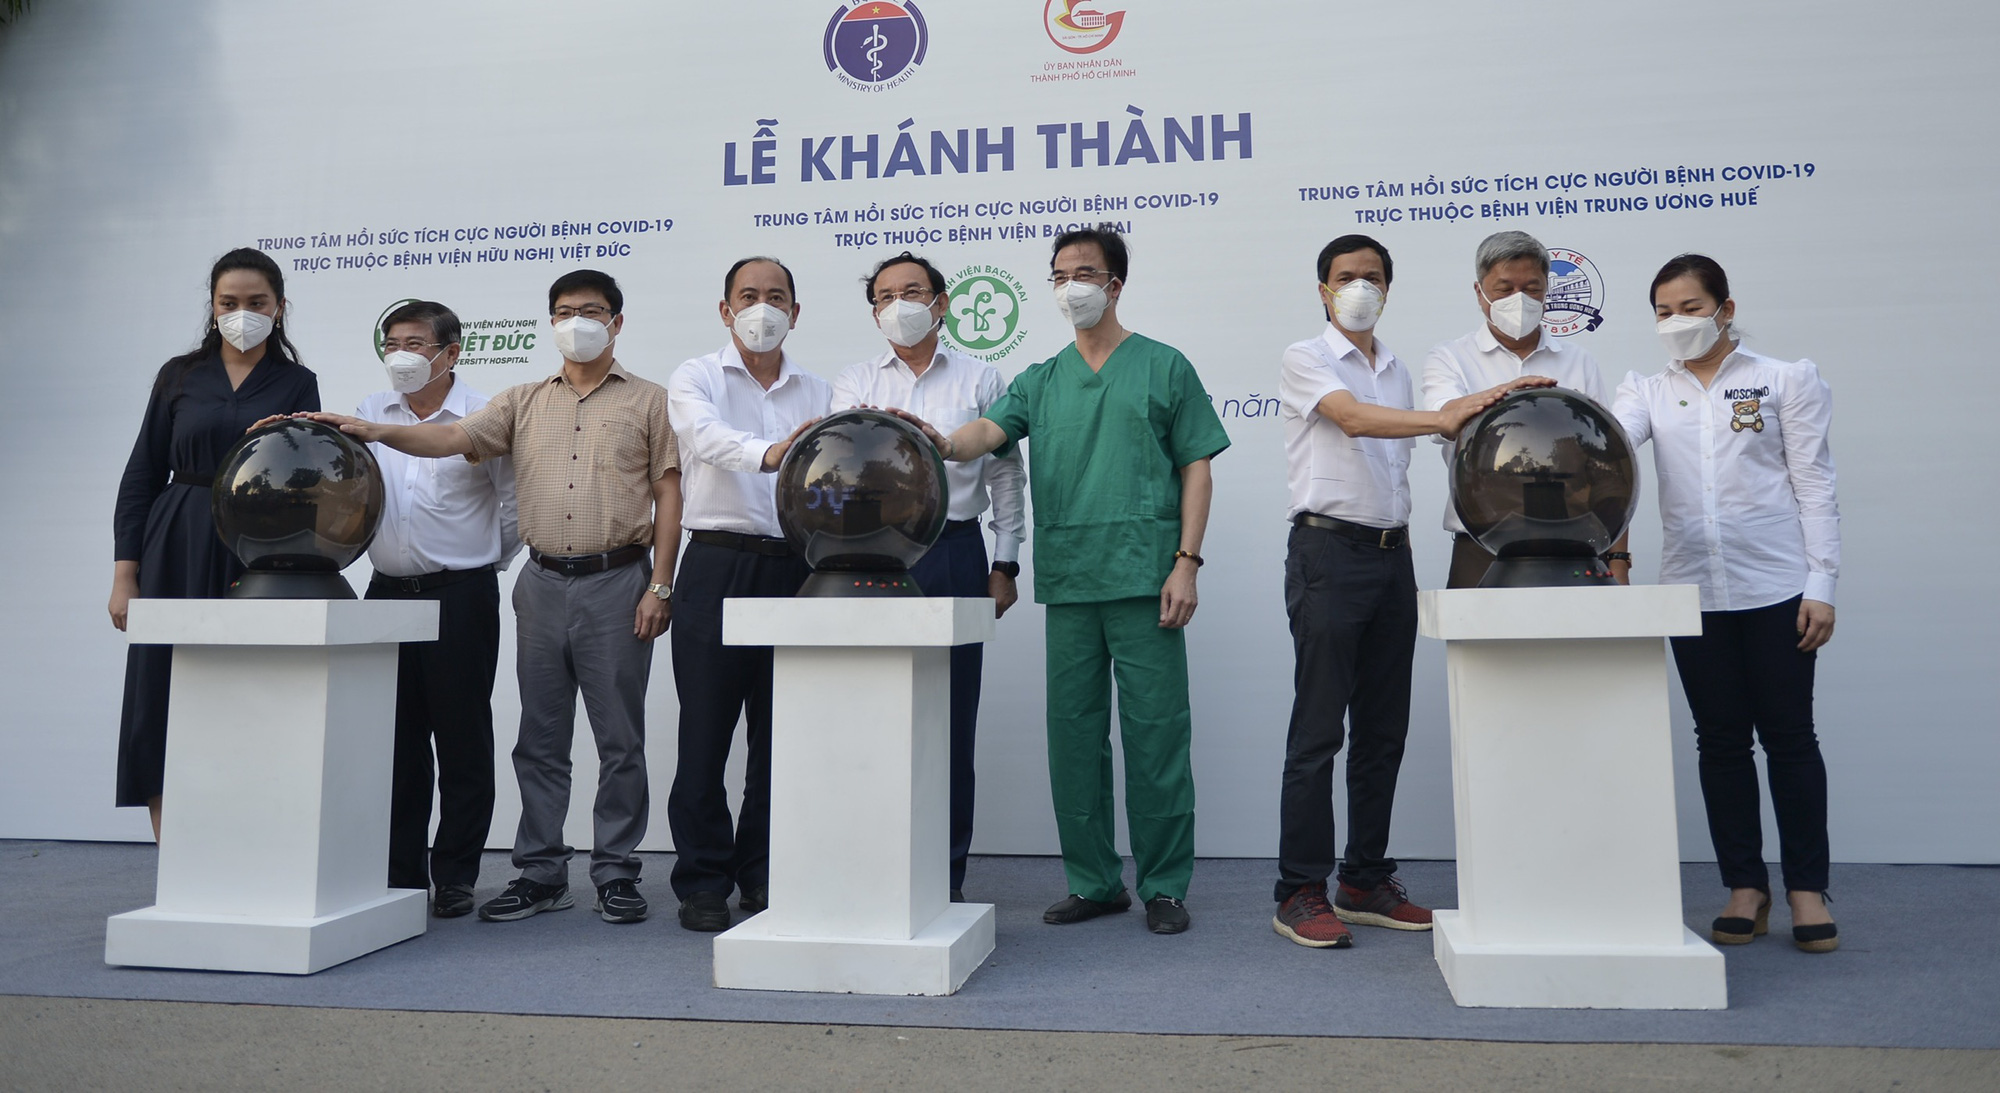 Ho Chi Minh City operates three COVID-19 intensive care centers with 1,500 beds